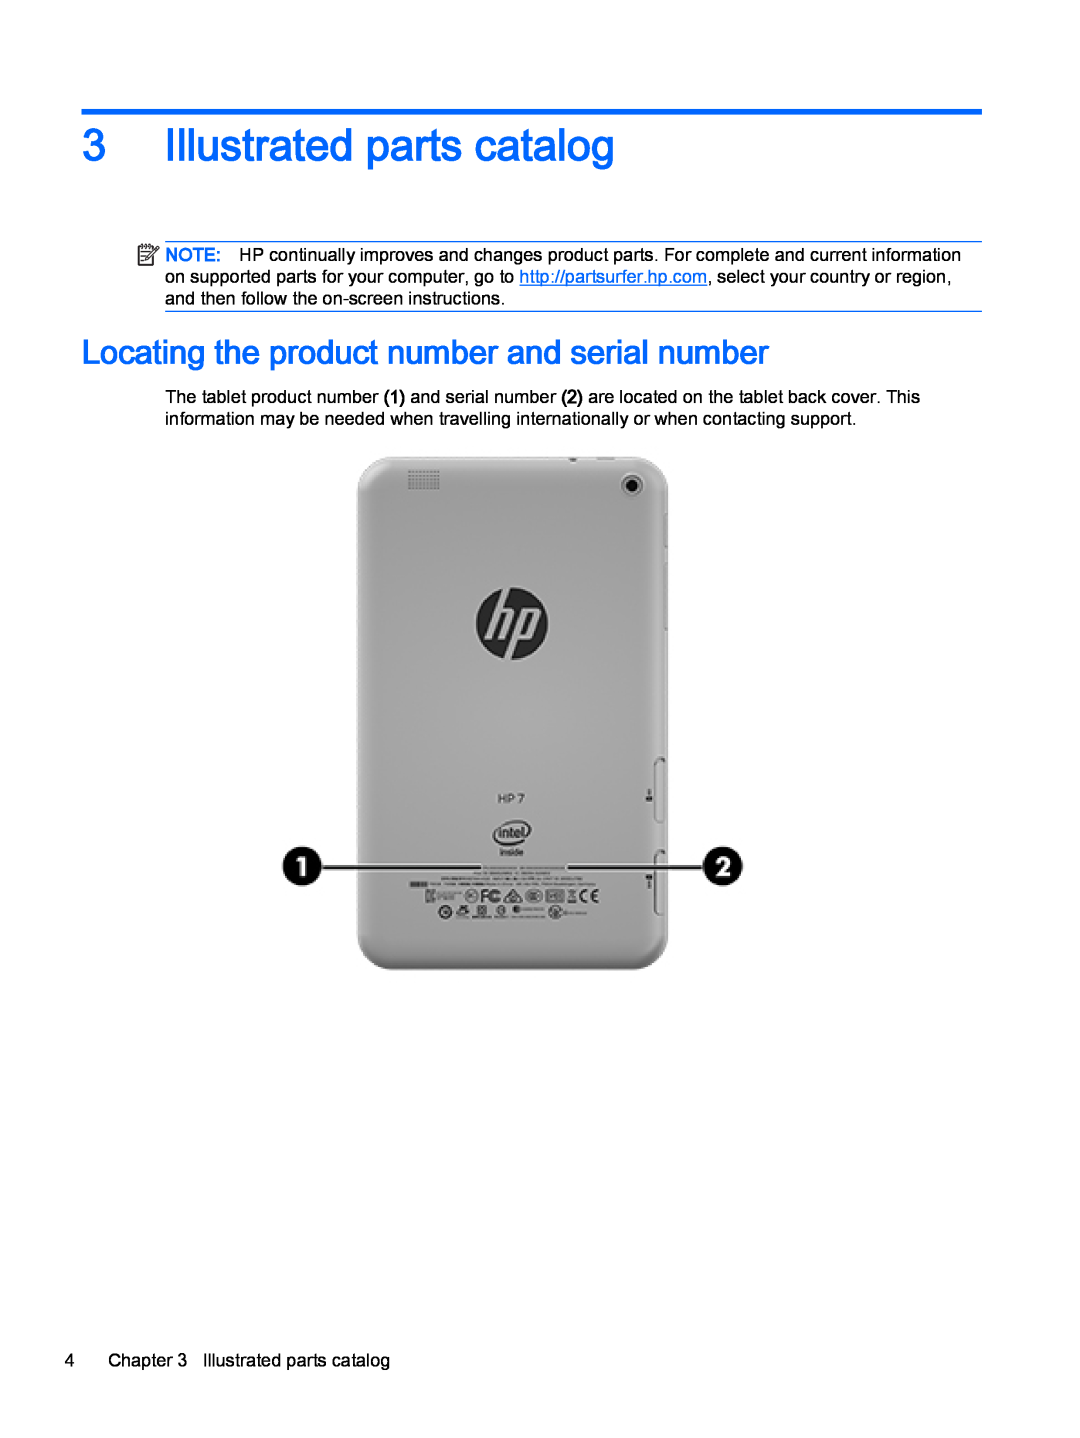 HP 7 Plus G2 - 1331 manual Illustrated parts catalog, Locating the product number and serial number 